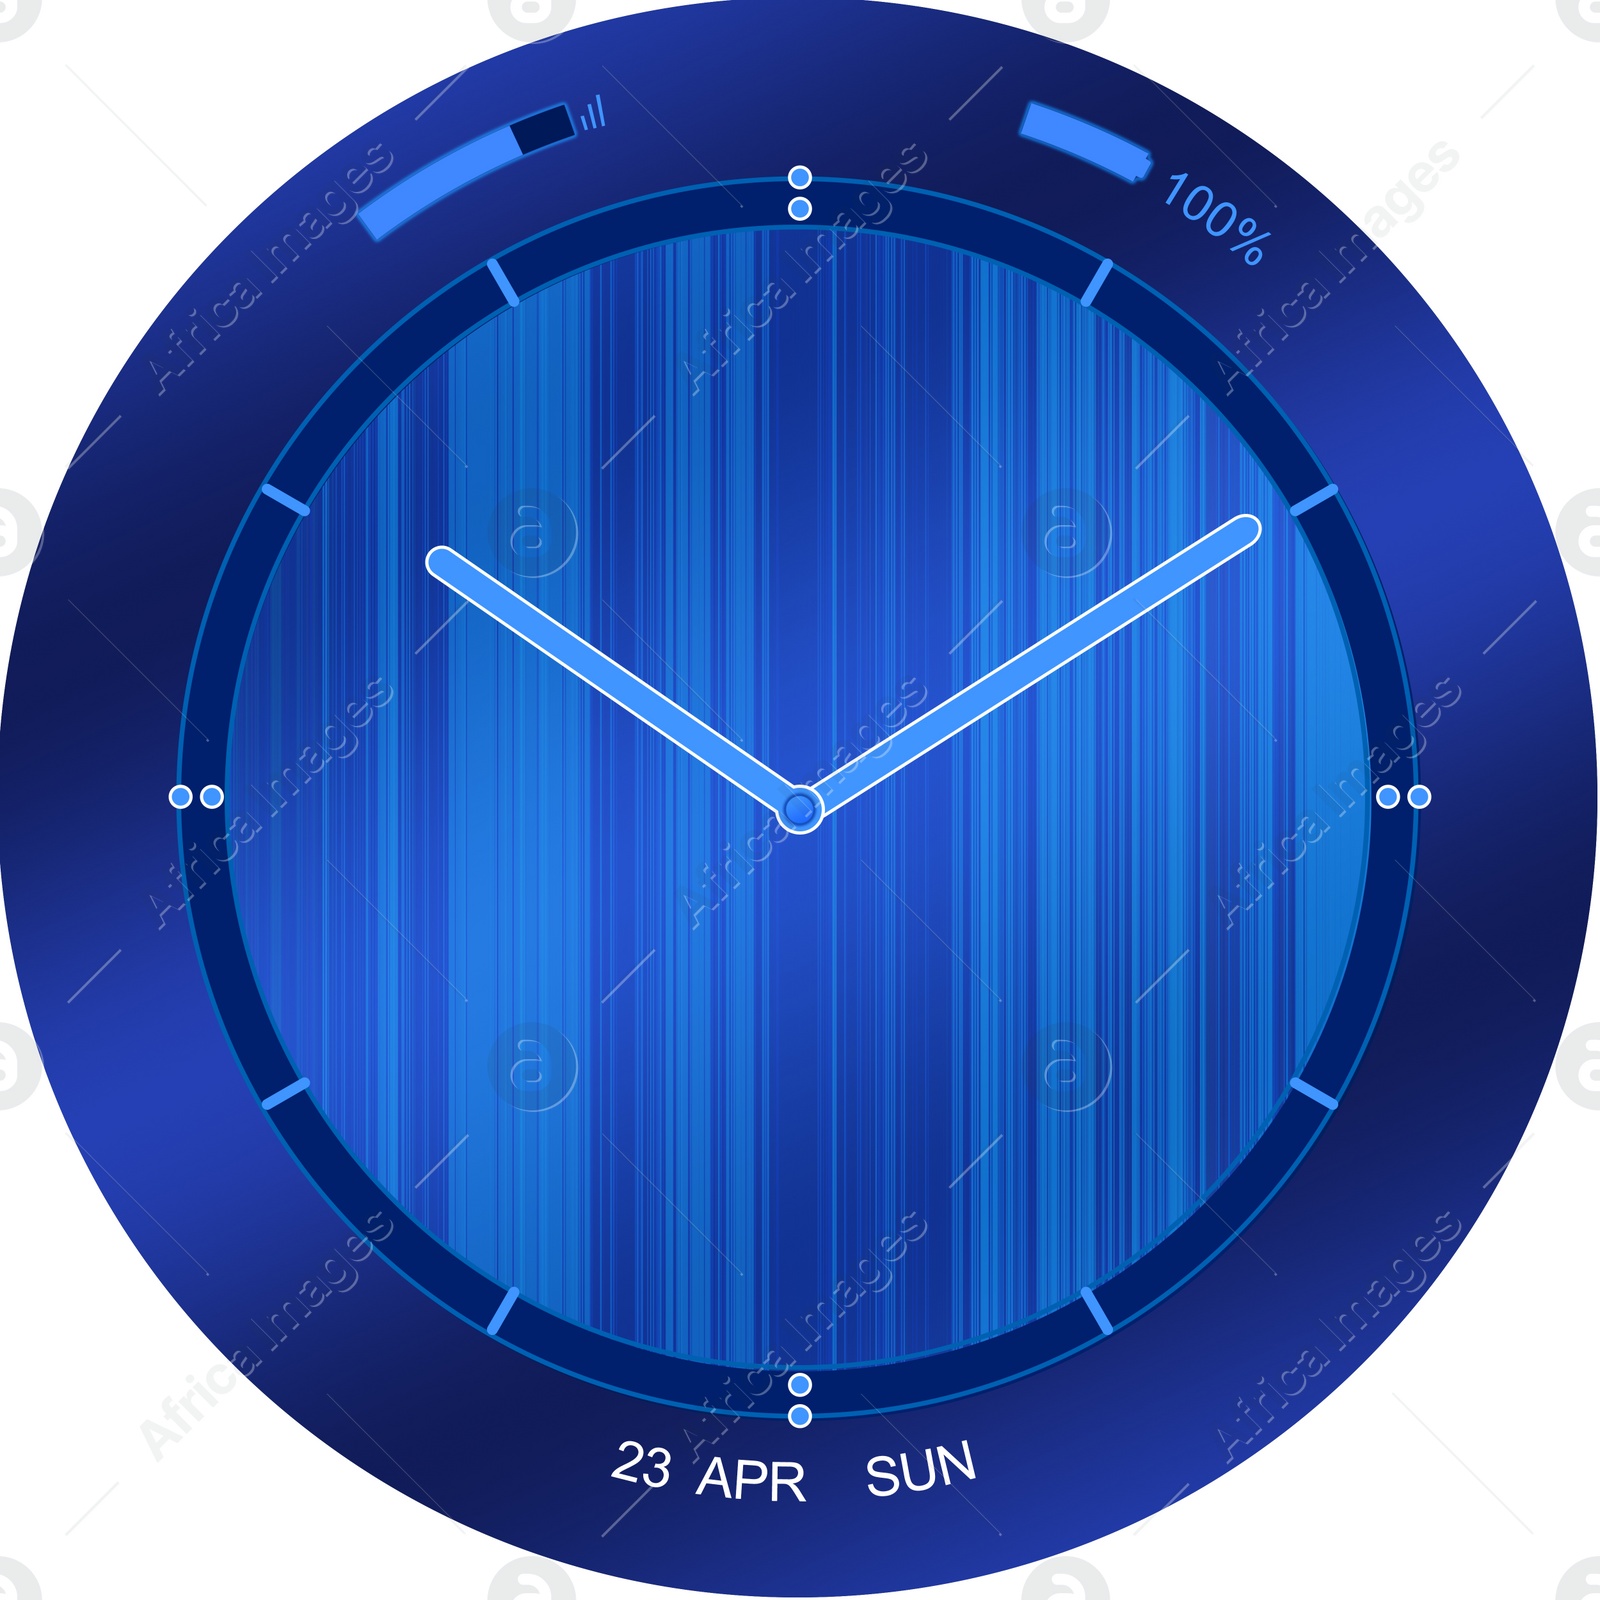 Illustration of Smart watch with analog clock face skin on display